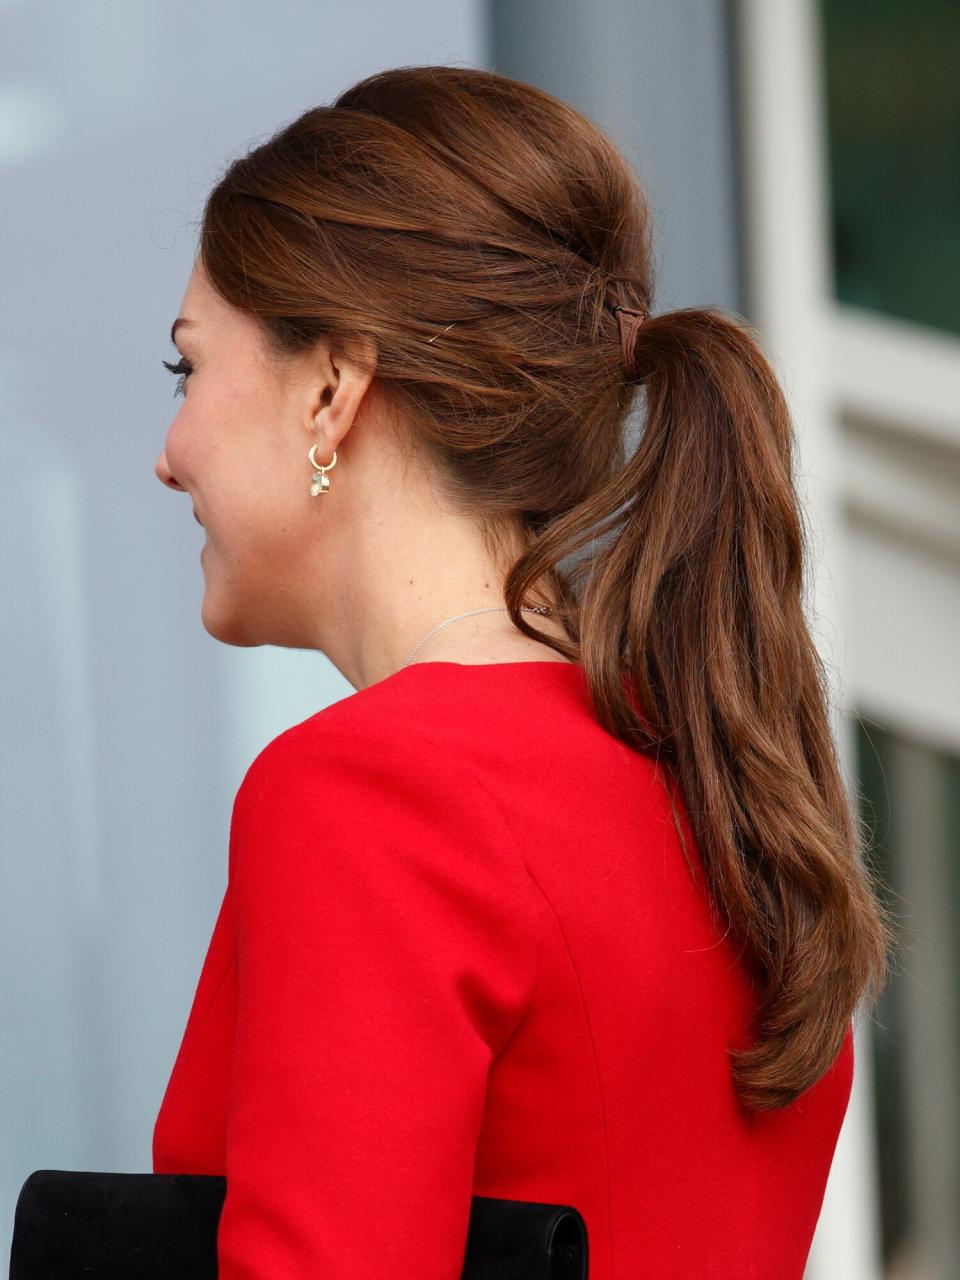 Catherine, Duchess of Cambridge (hair detail) attends the East Anglia's Children's Hospices (EACH) Norfolk Capital Appeal launch event at the Norfolk Showground on November 25, 2014 in Norwich, England